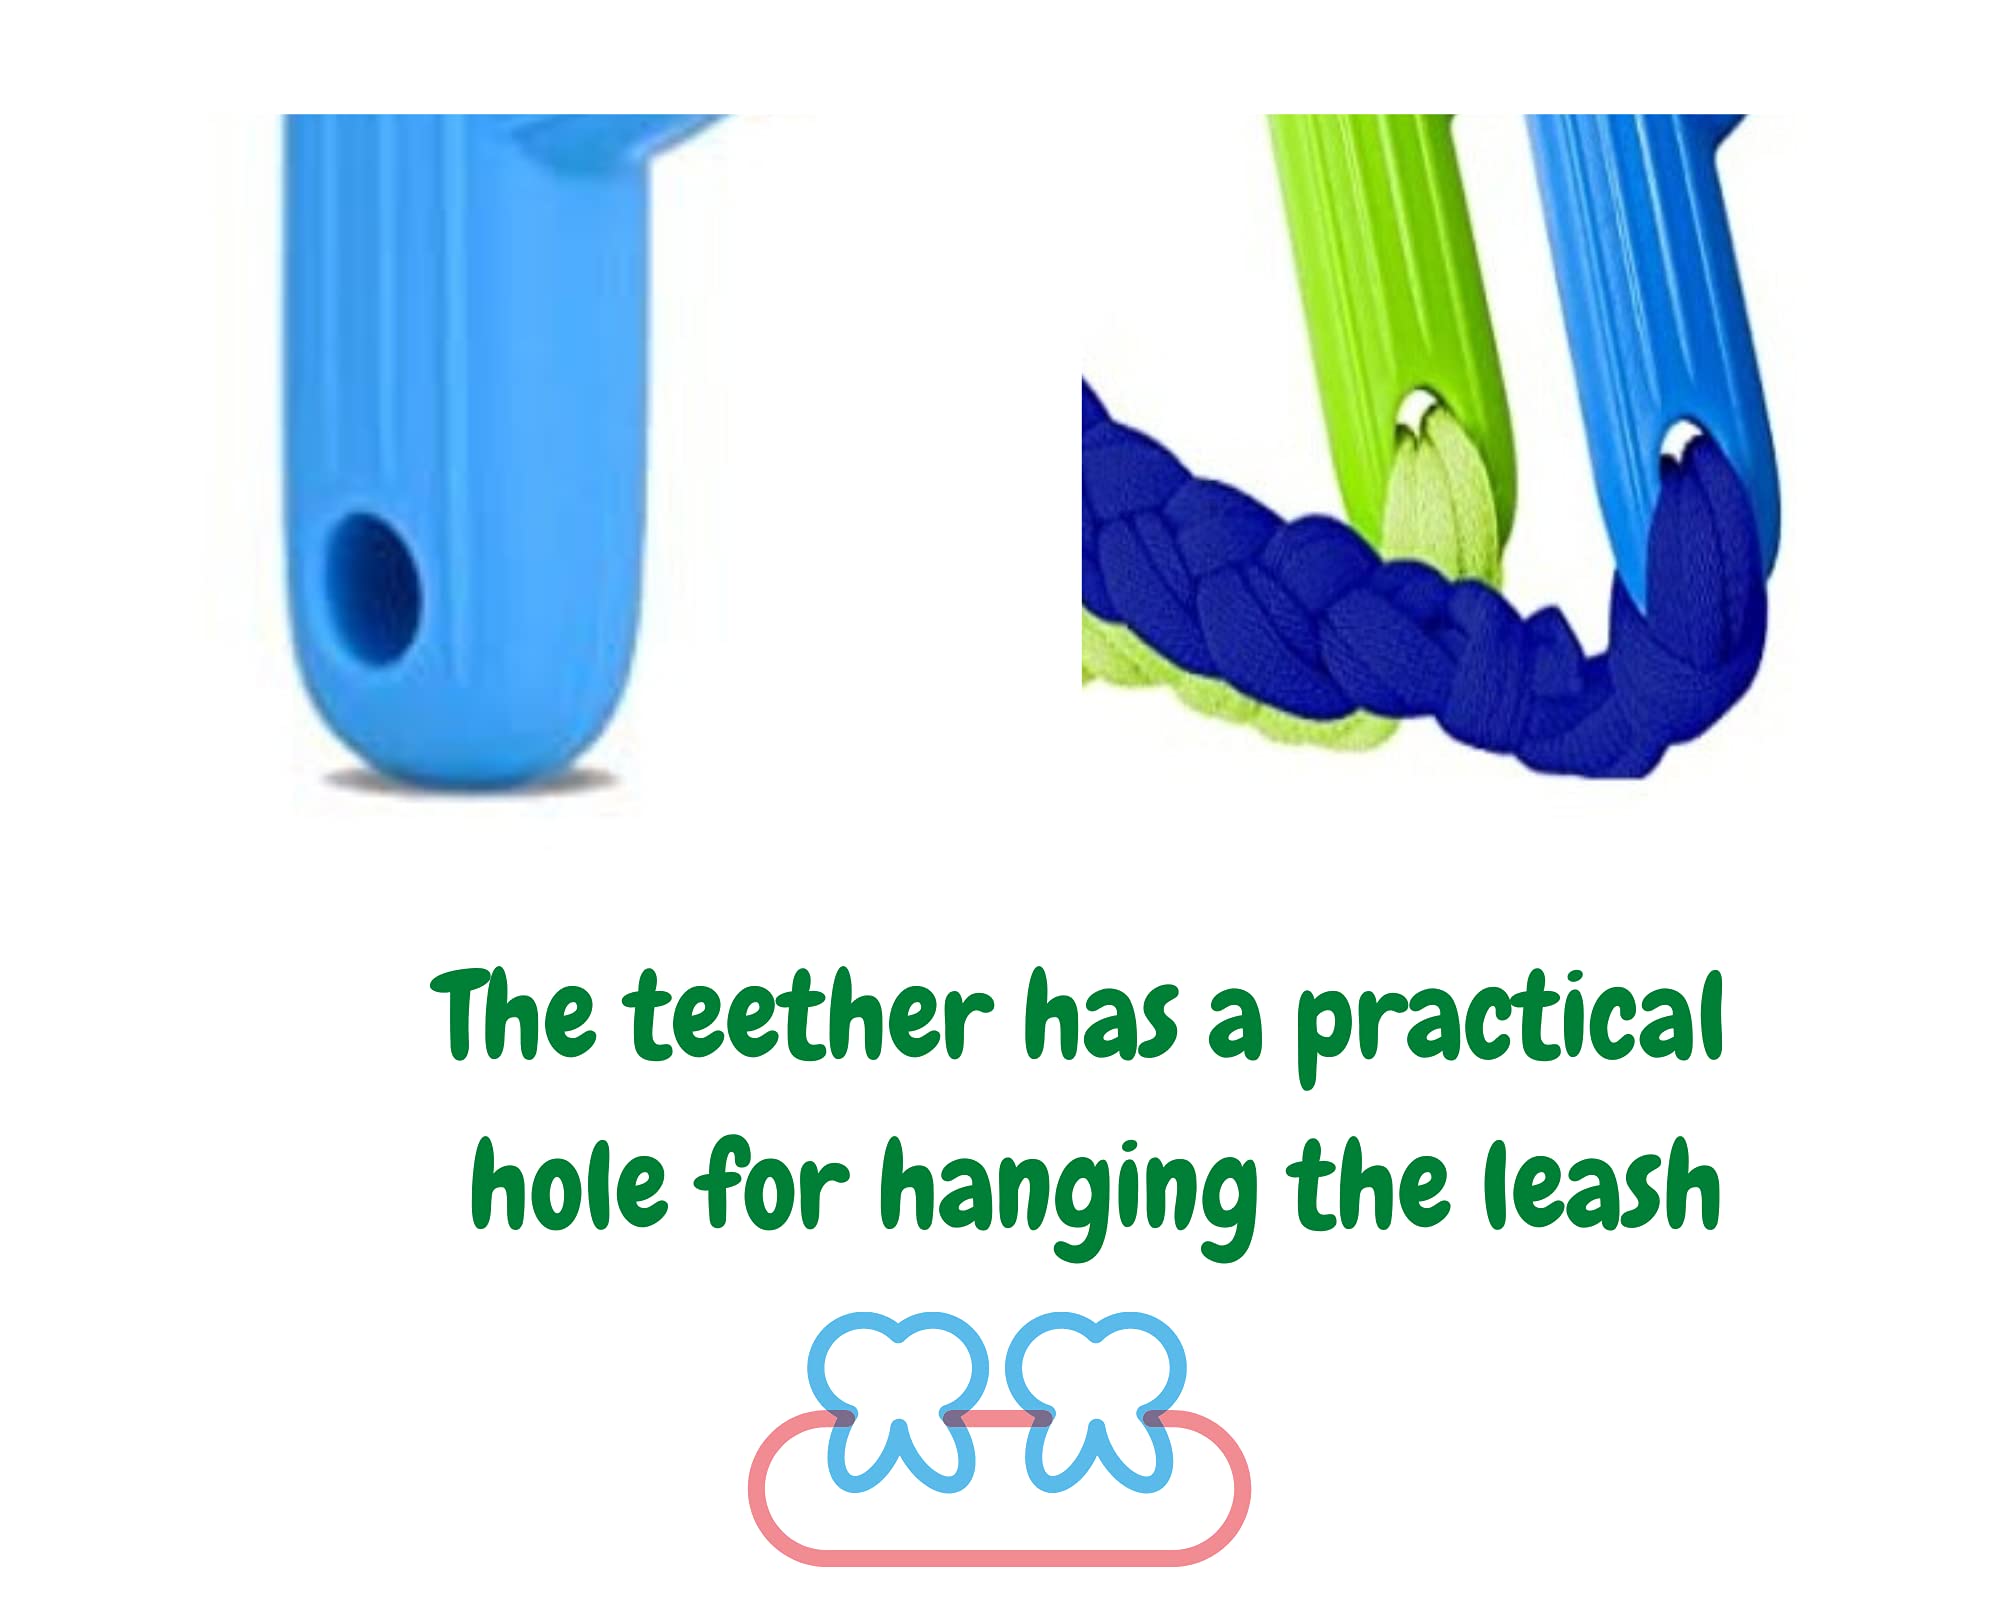 Colourful Silicone Toothbrush for Babies in The Shape of a Cactus ***Blue***